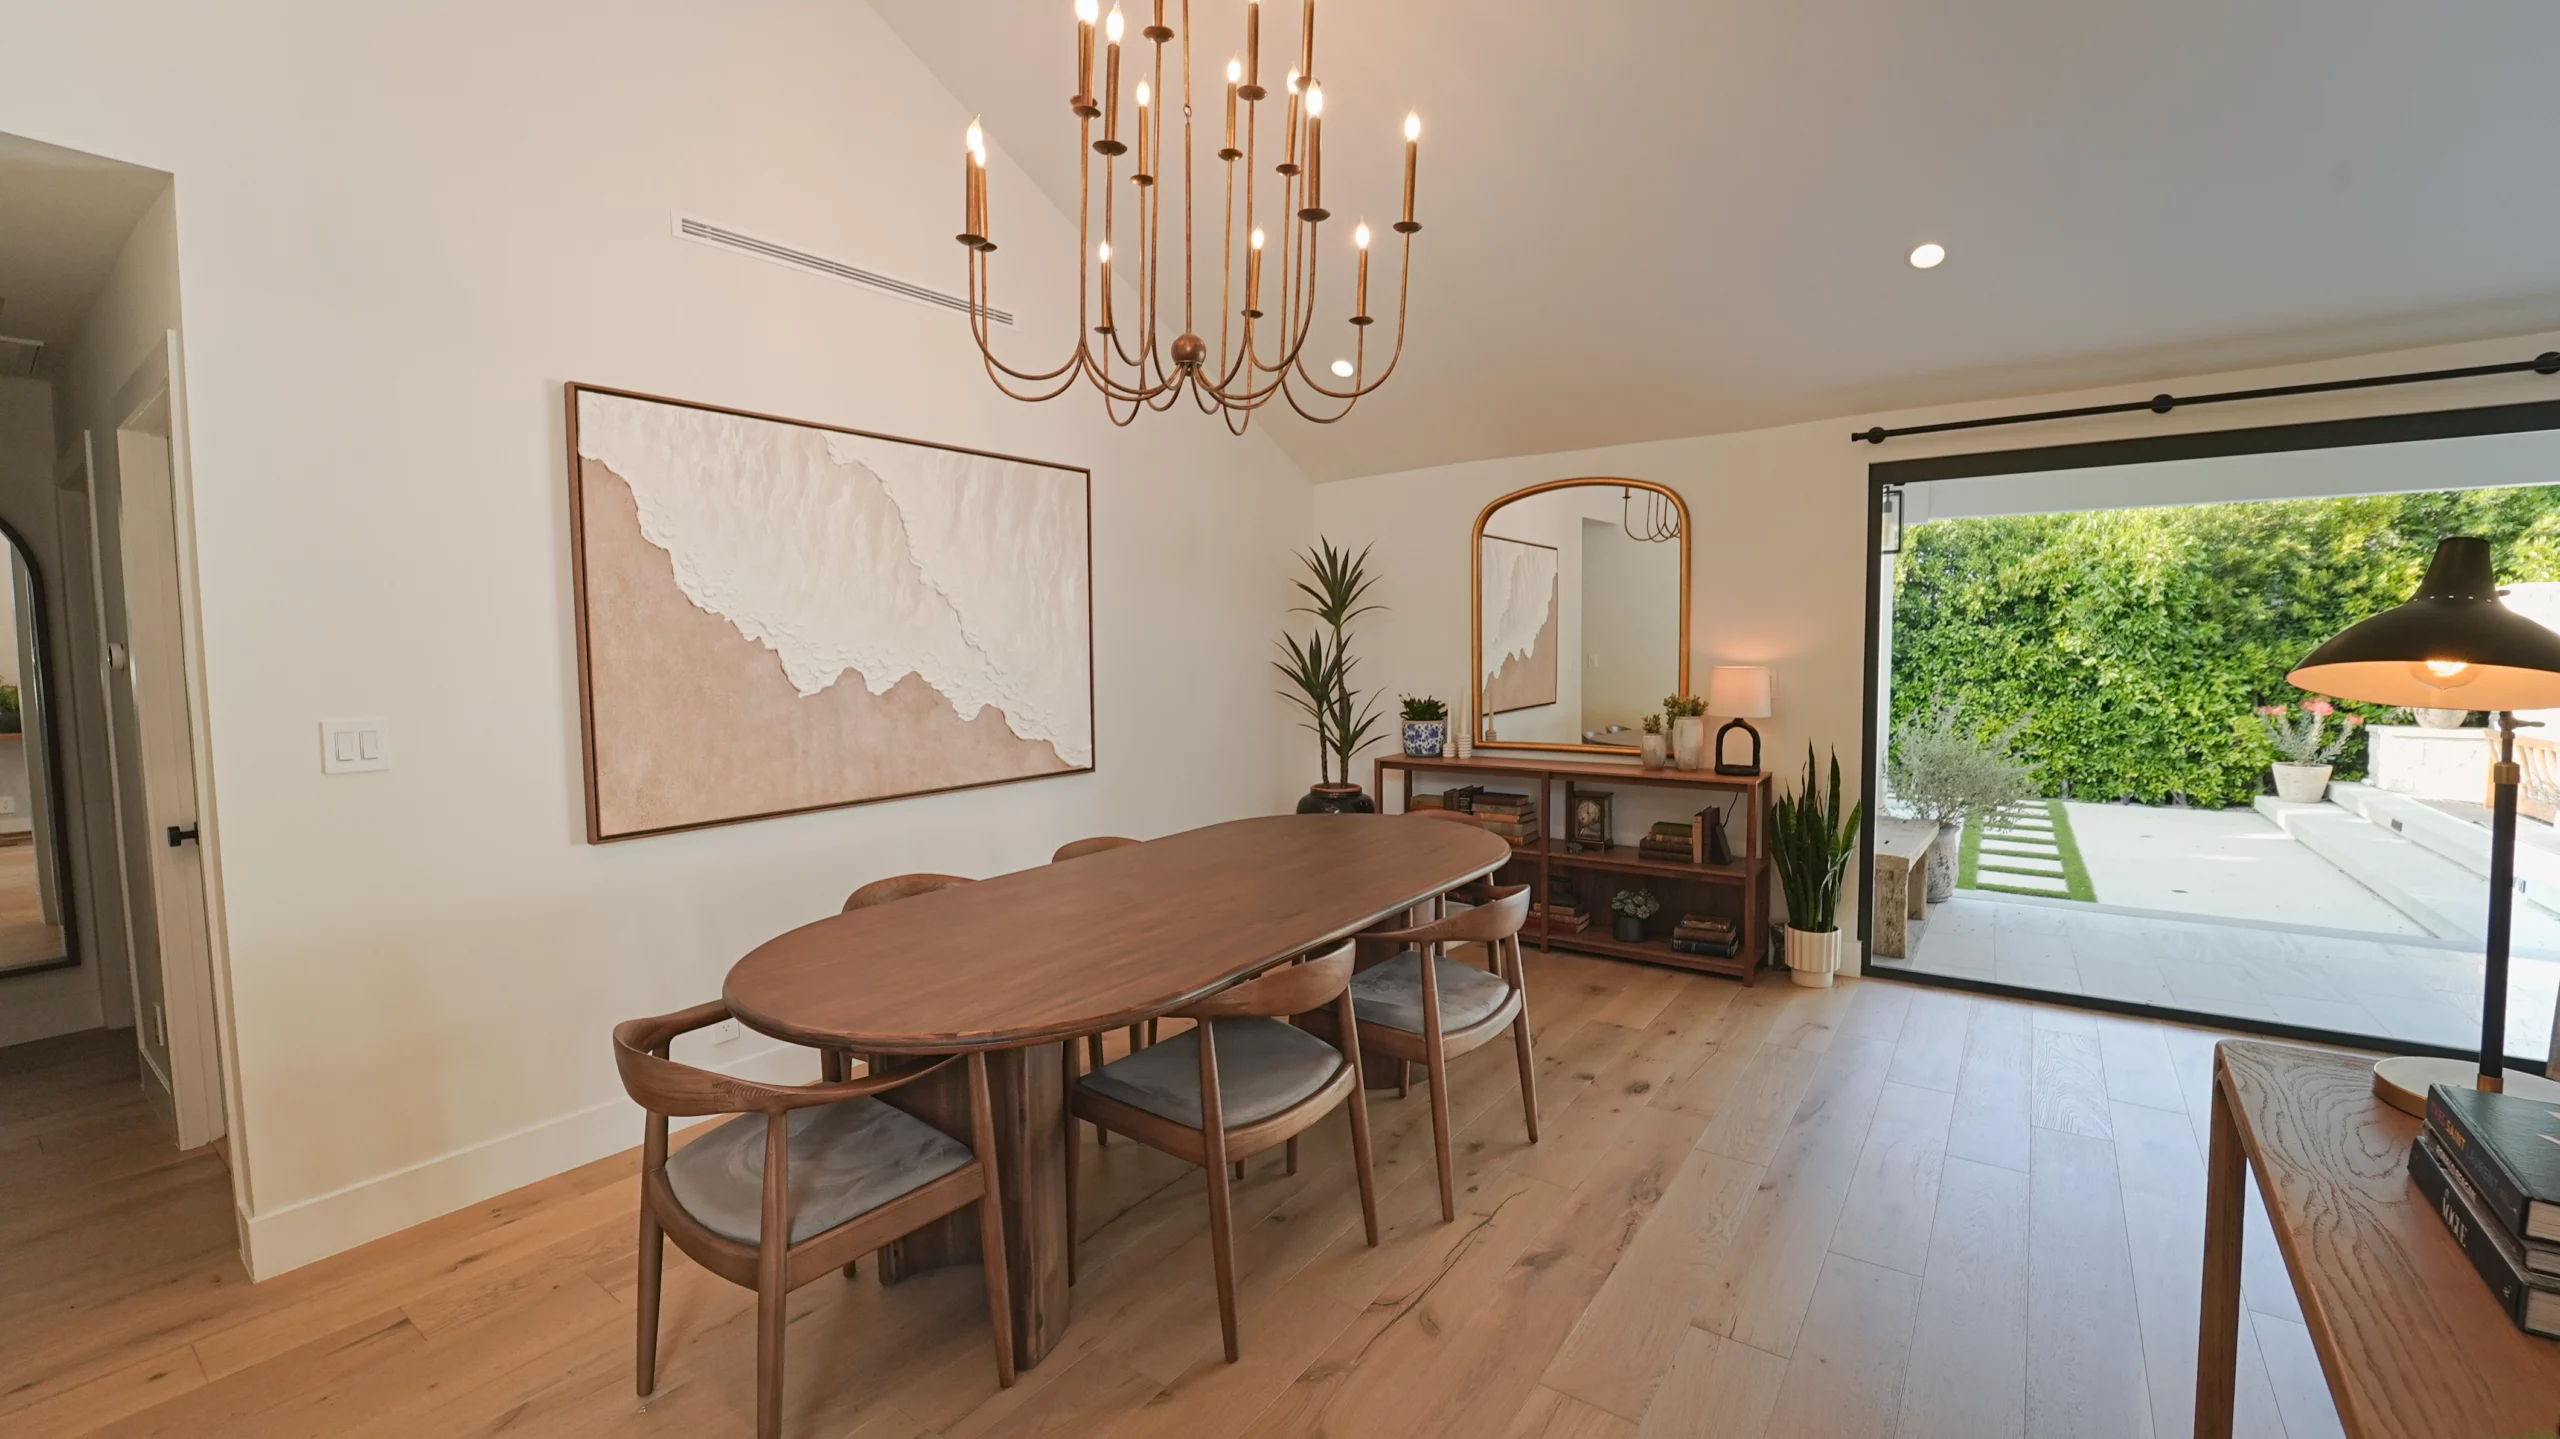 Modern dining room with wooden table and chandelier.